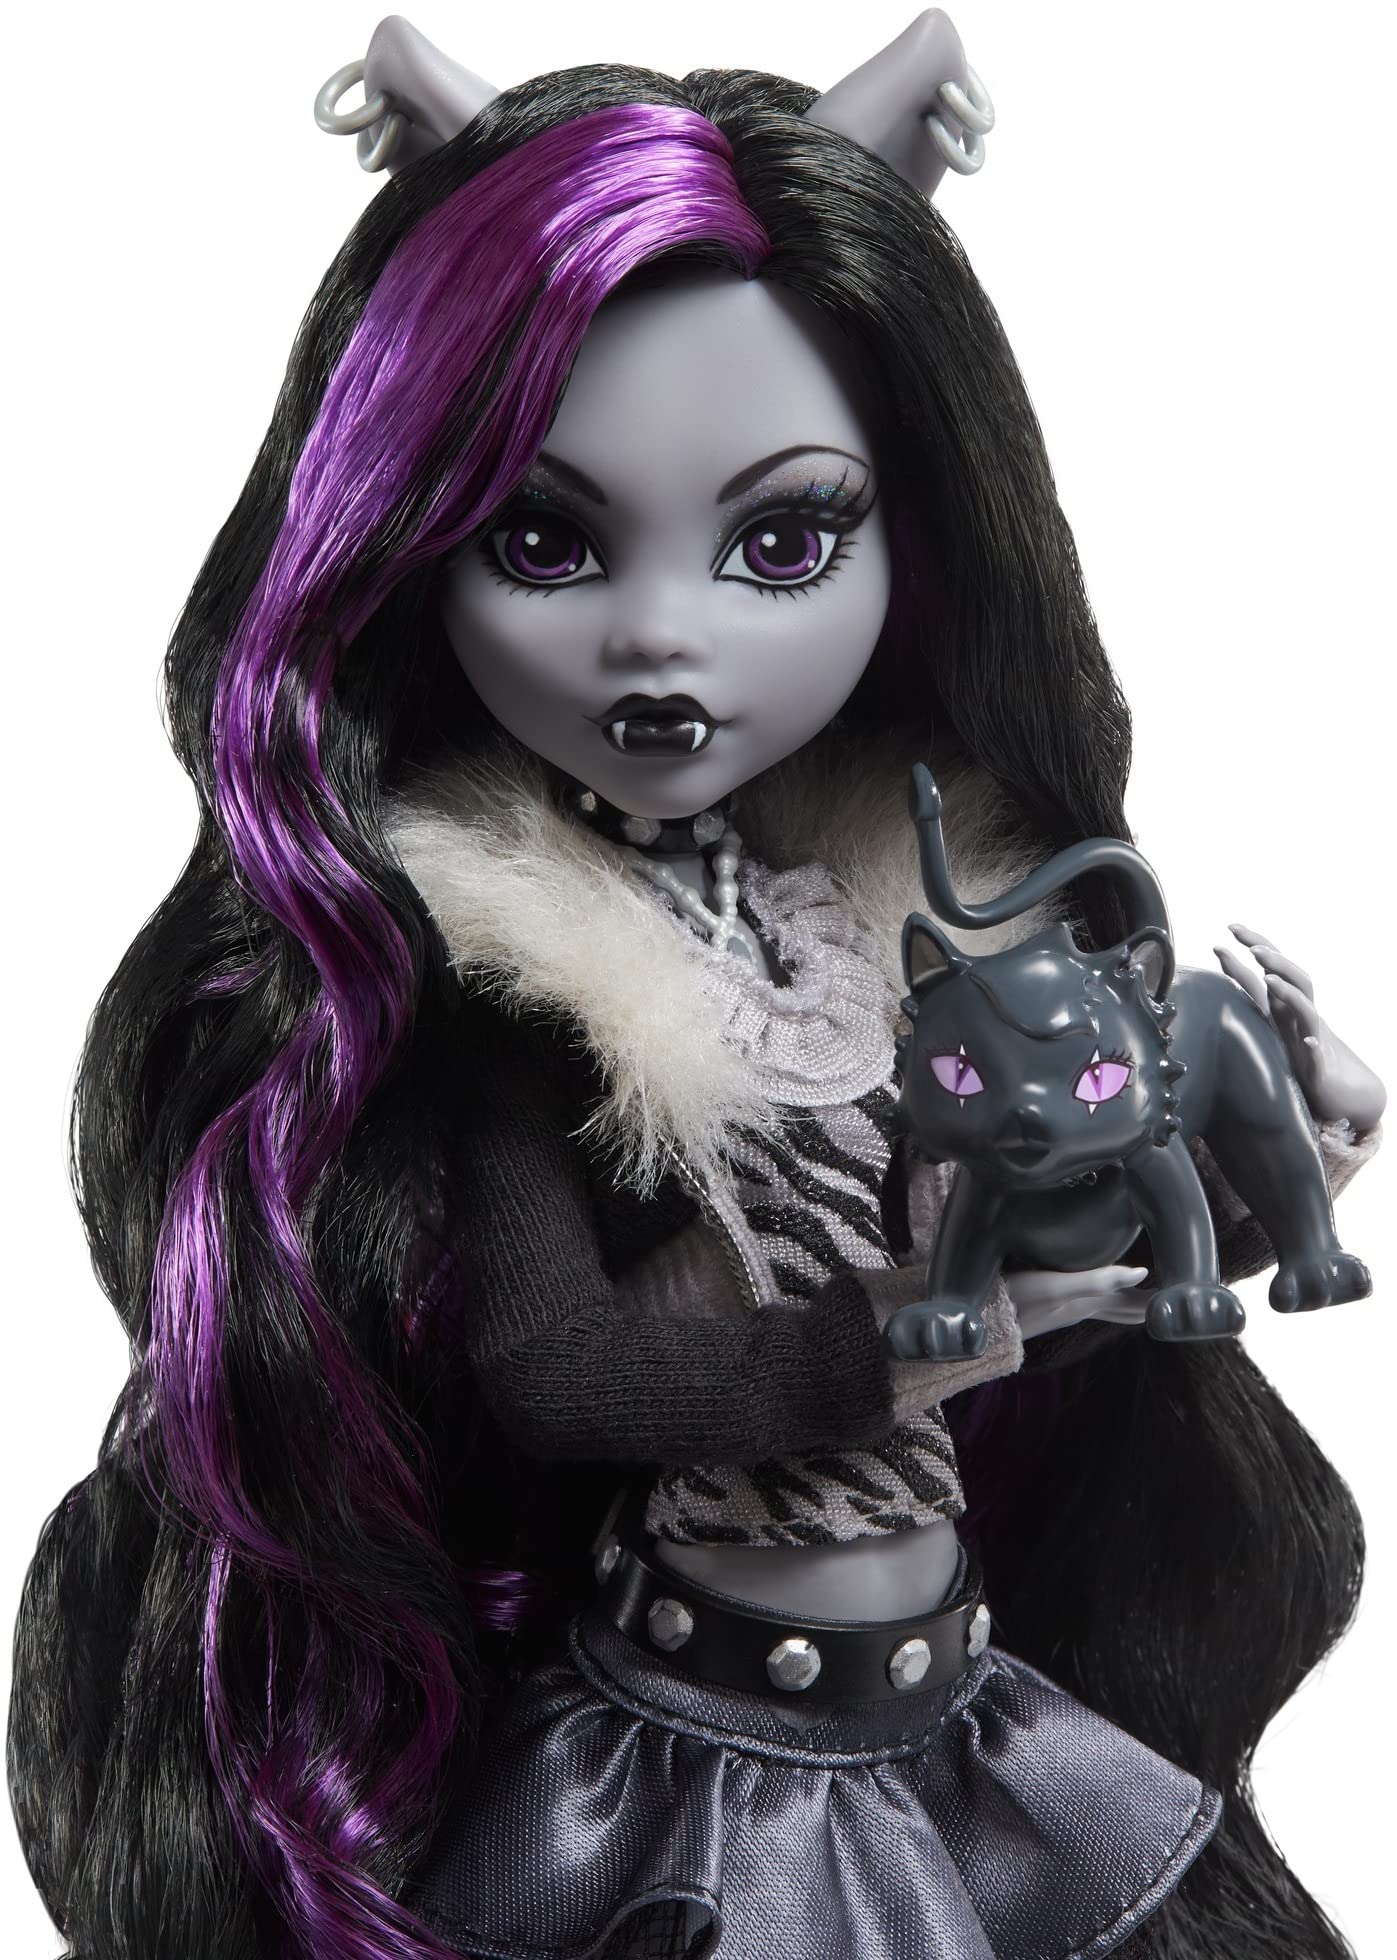 Monster High Doll, Clawdeen Wolf in Black and White, Reel Drama Collector Doll, Doll-Size and Life-Size Posters, Horror Flick Theme, Toys and Gifts